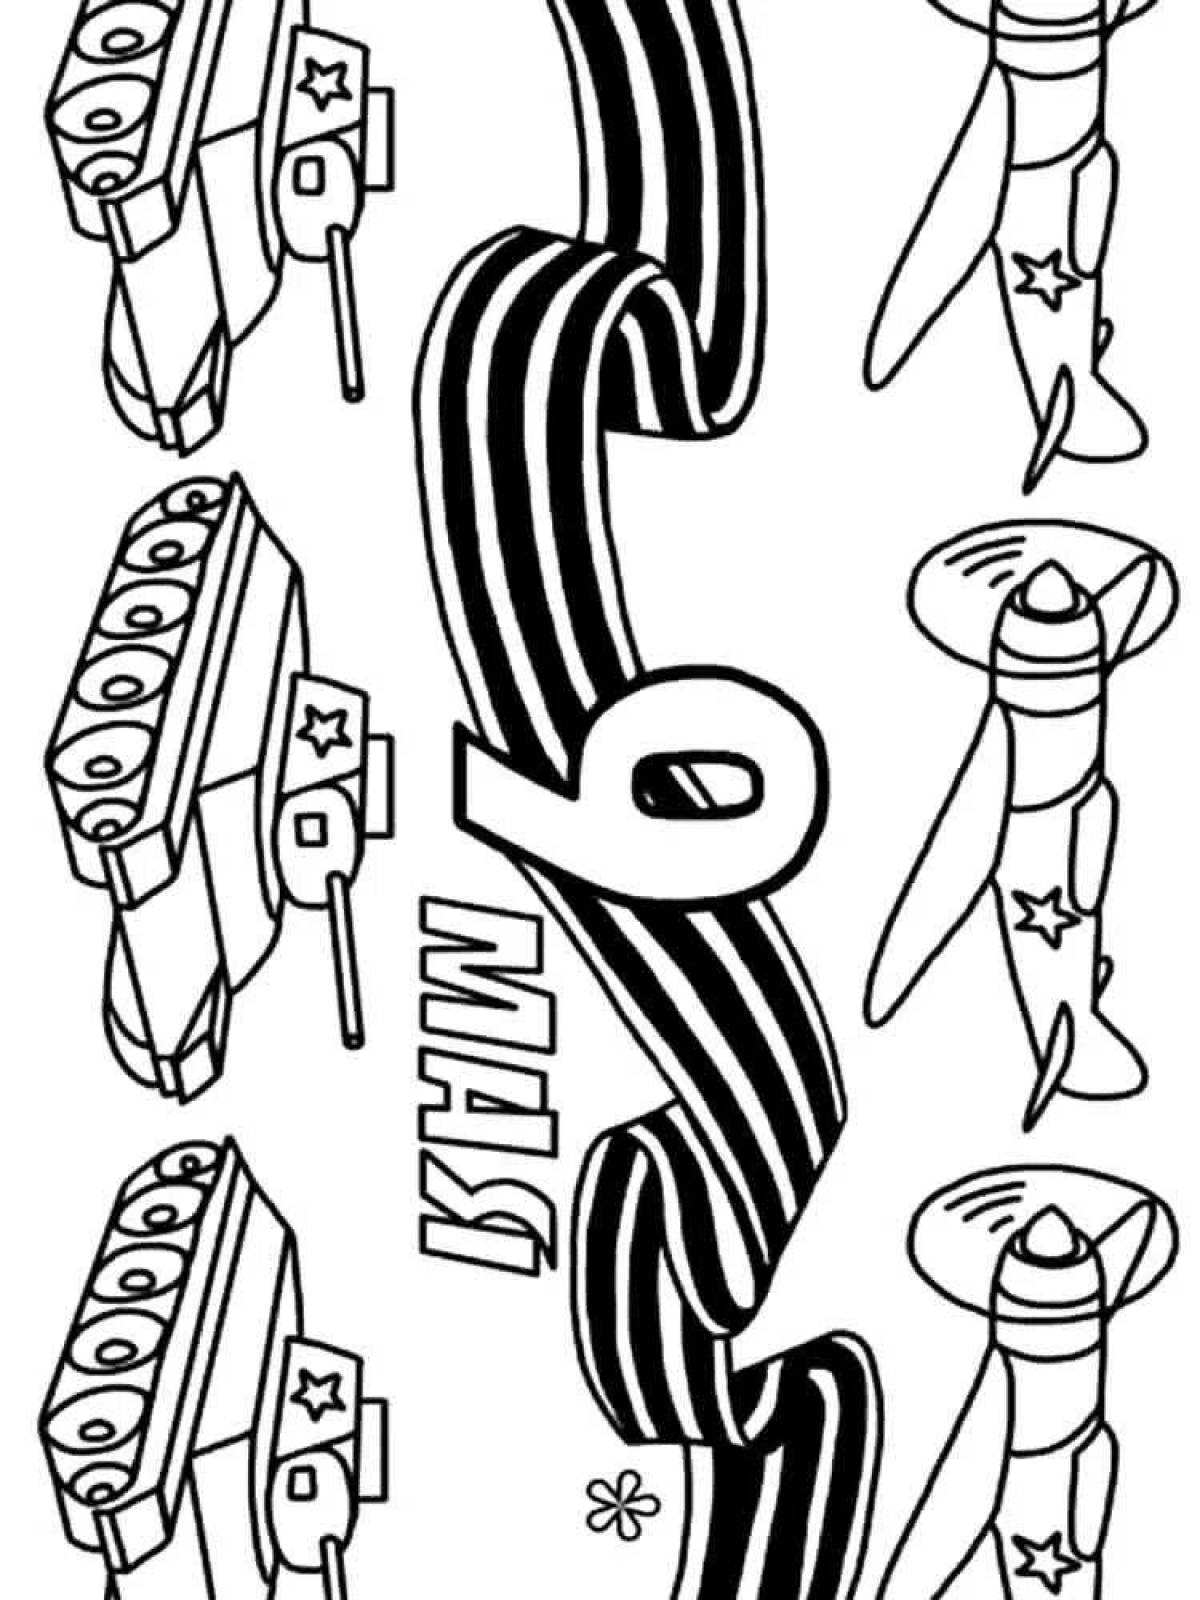 Drawing of a richly decorated St. George ribbon